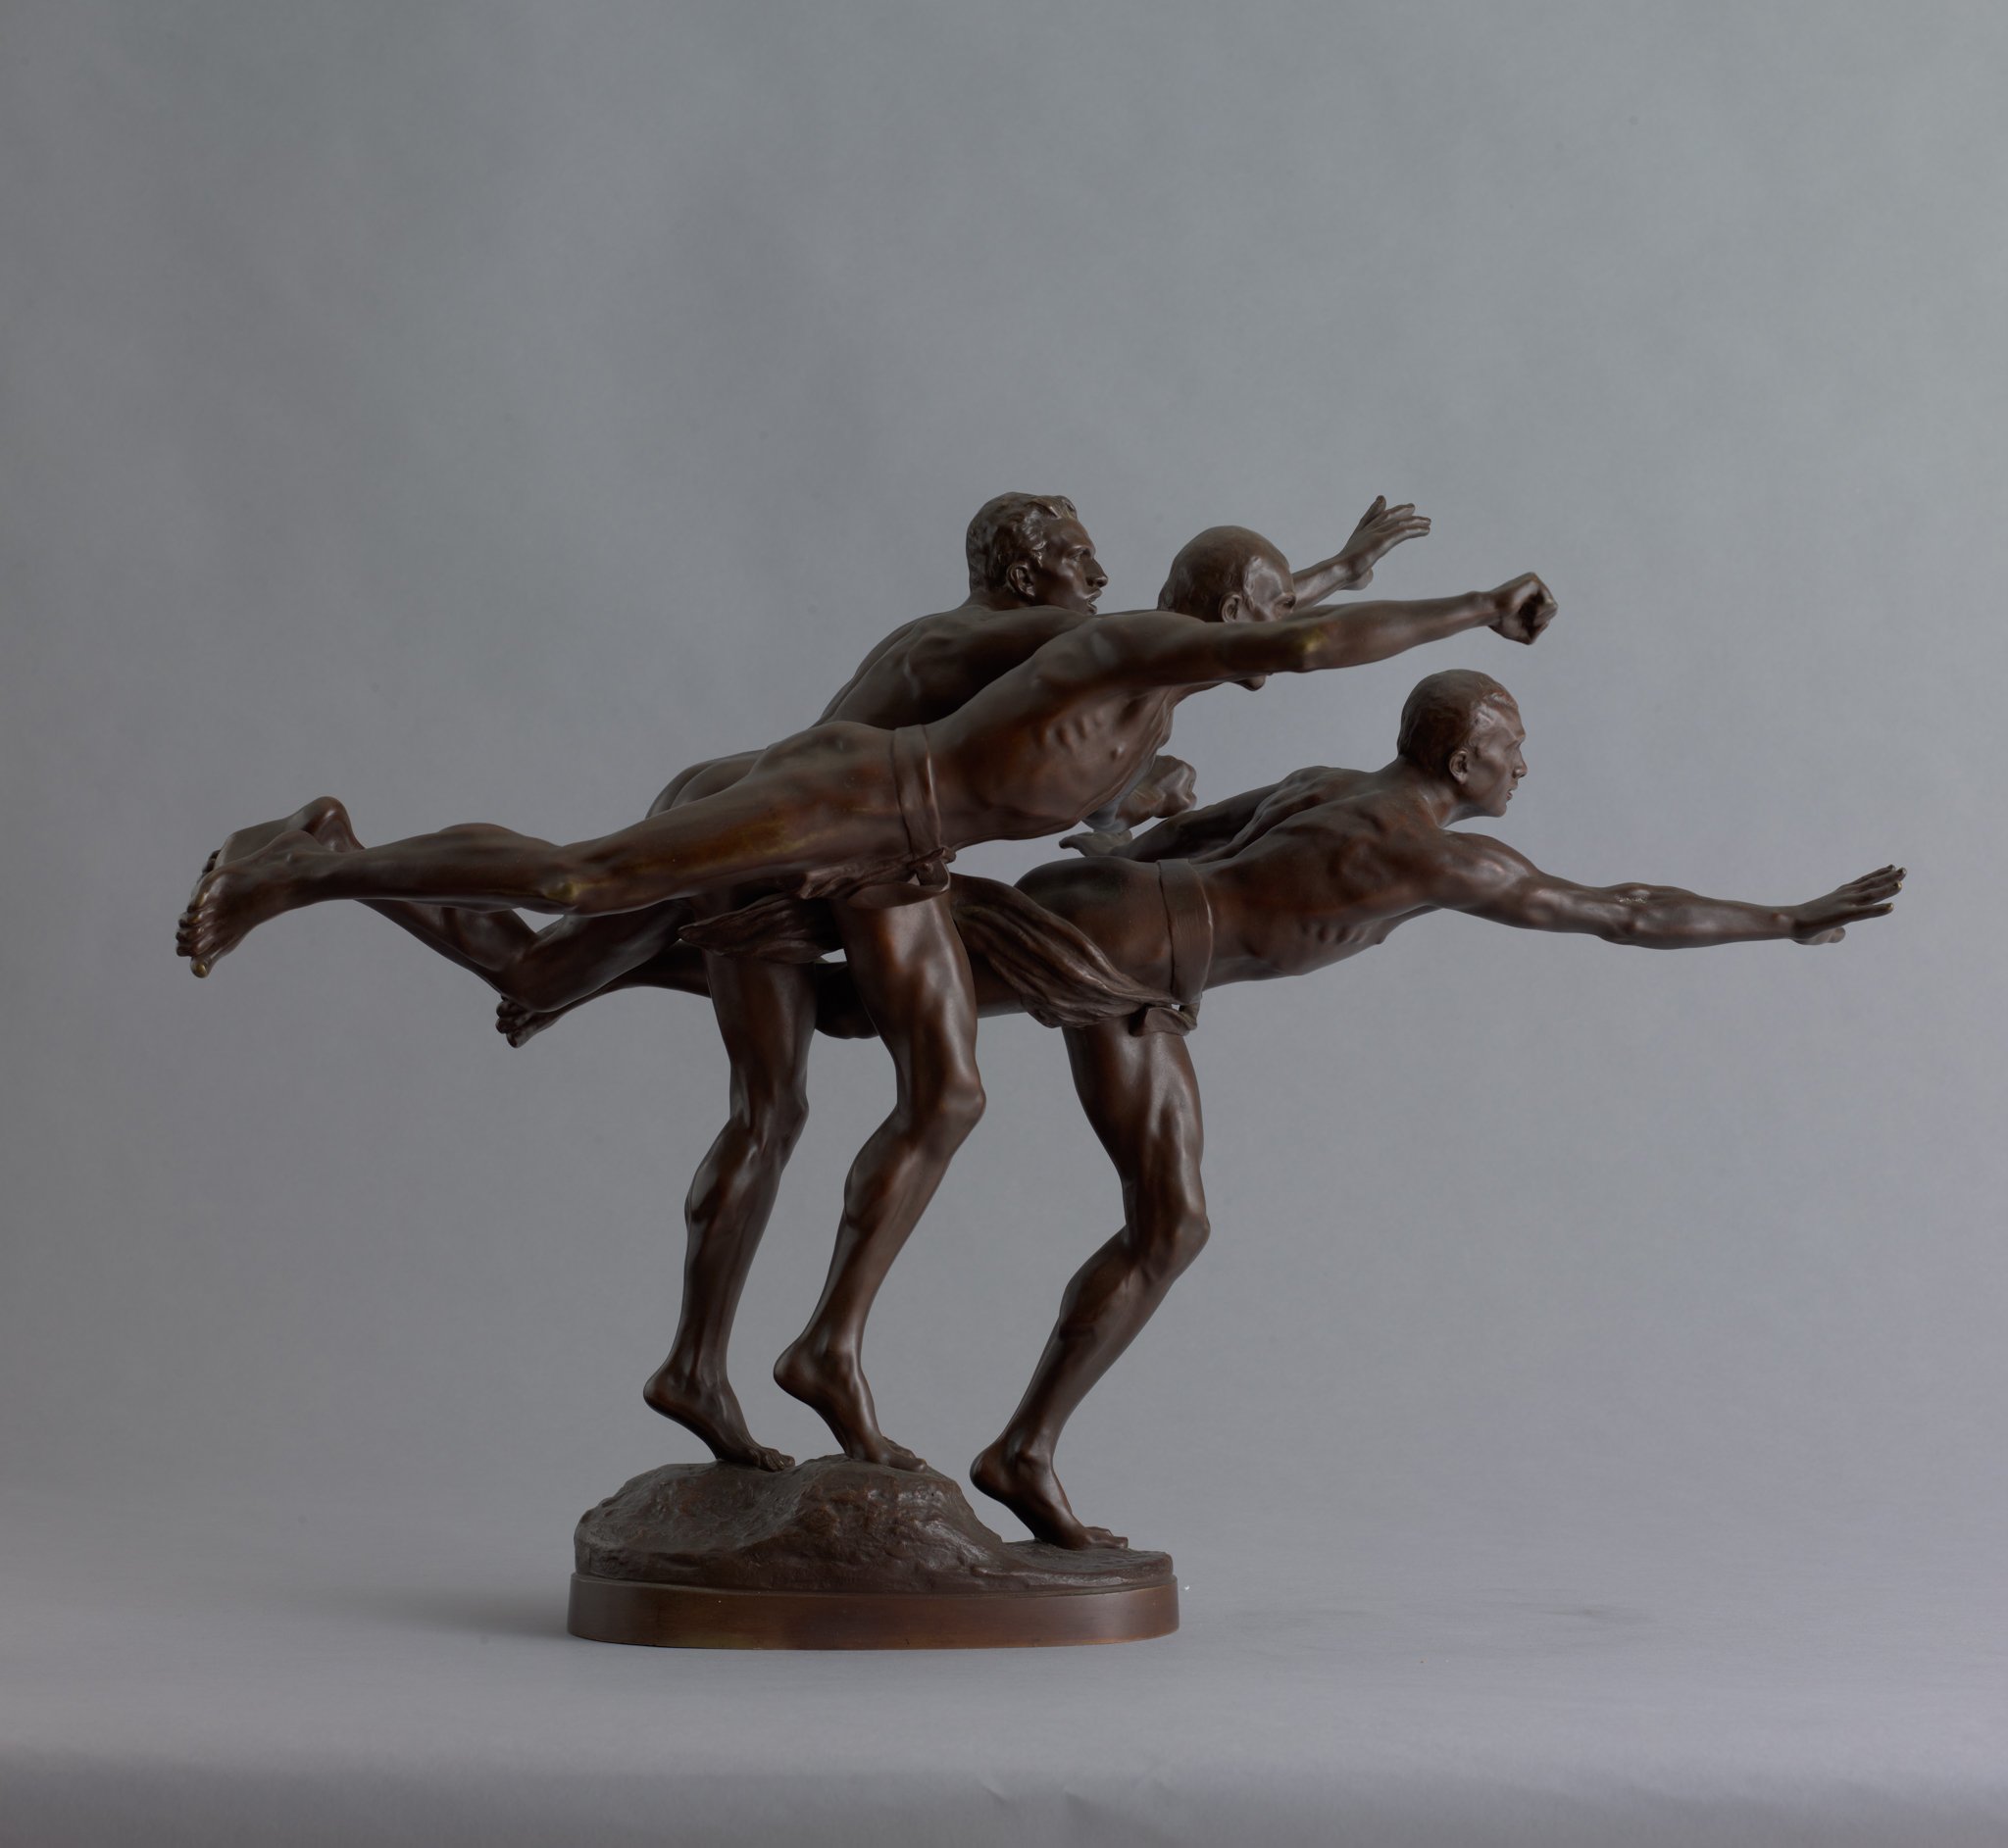  Alfred Boucher (France, 1850-1934),  Au But (The Finishing Line) , circa 1890, bronze, 18 x 26 3/4 x 15 inches. Bequest of Eleanor G. Potter, 2021.6.10. Image courtesy Luc Demers 